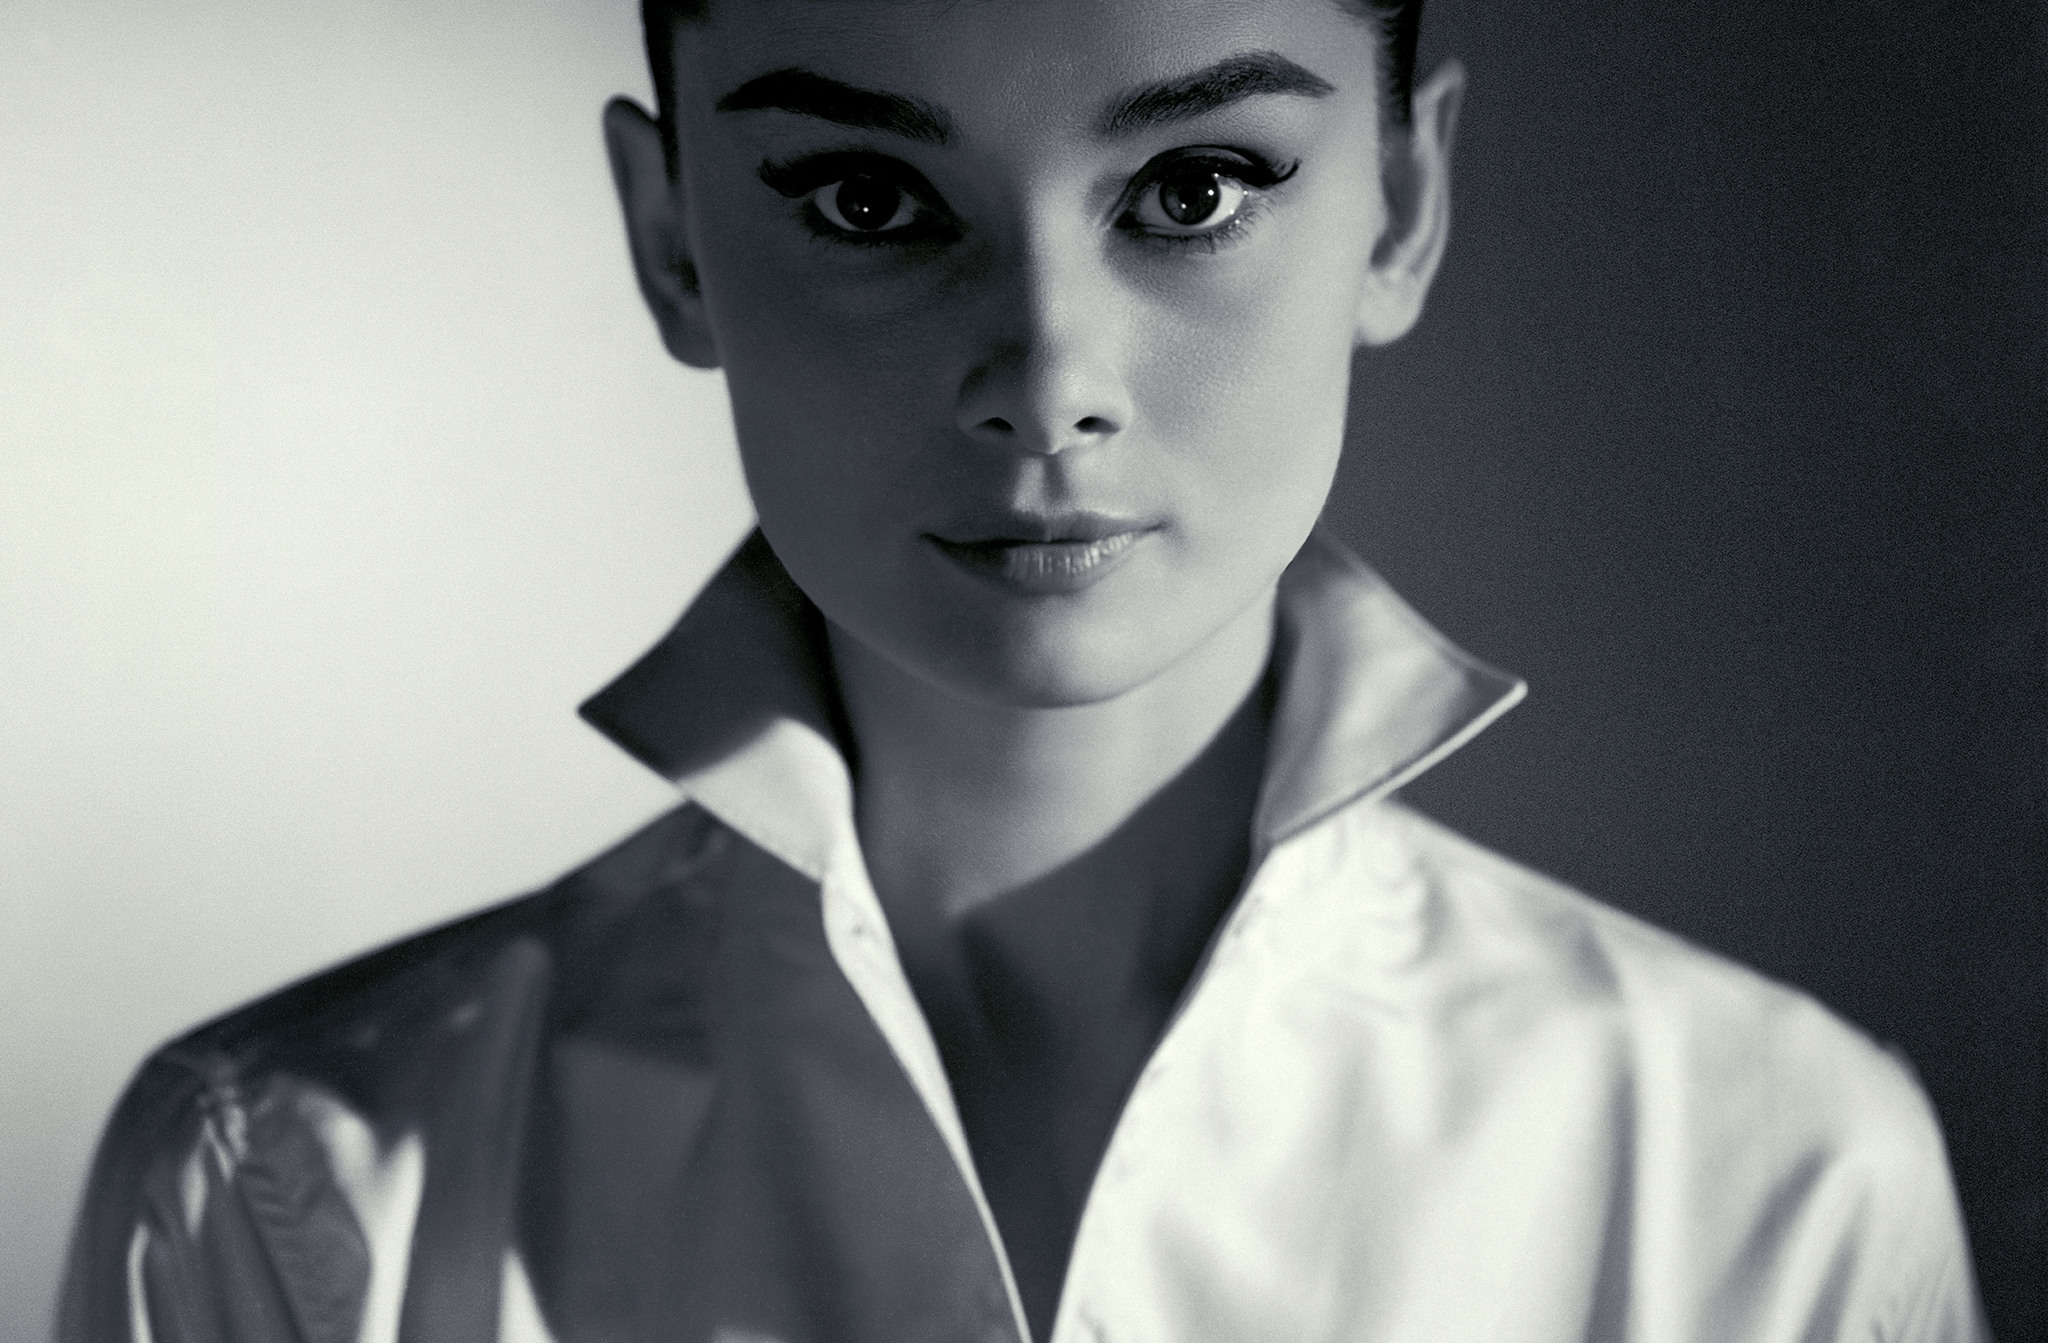 Still of Audrey Hepburn in Cameraman: The Life and Work of Jack Cardiff (2010)